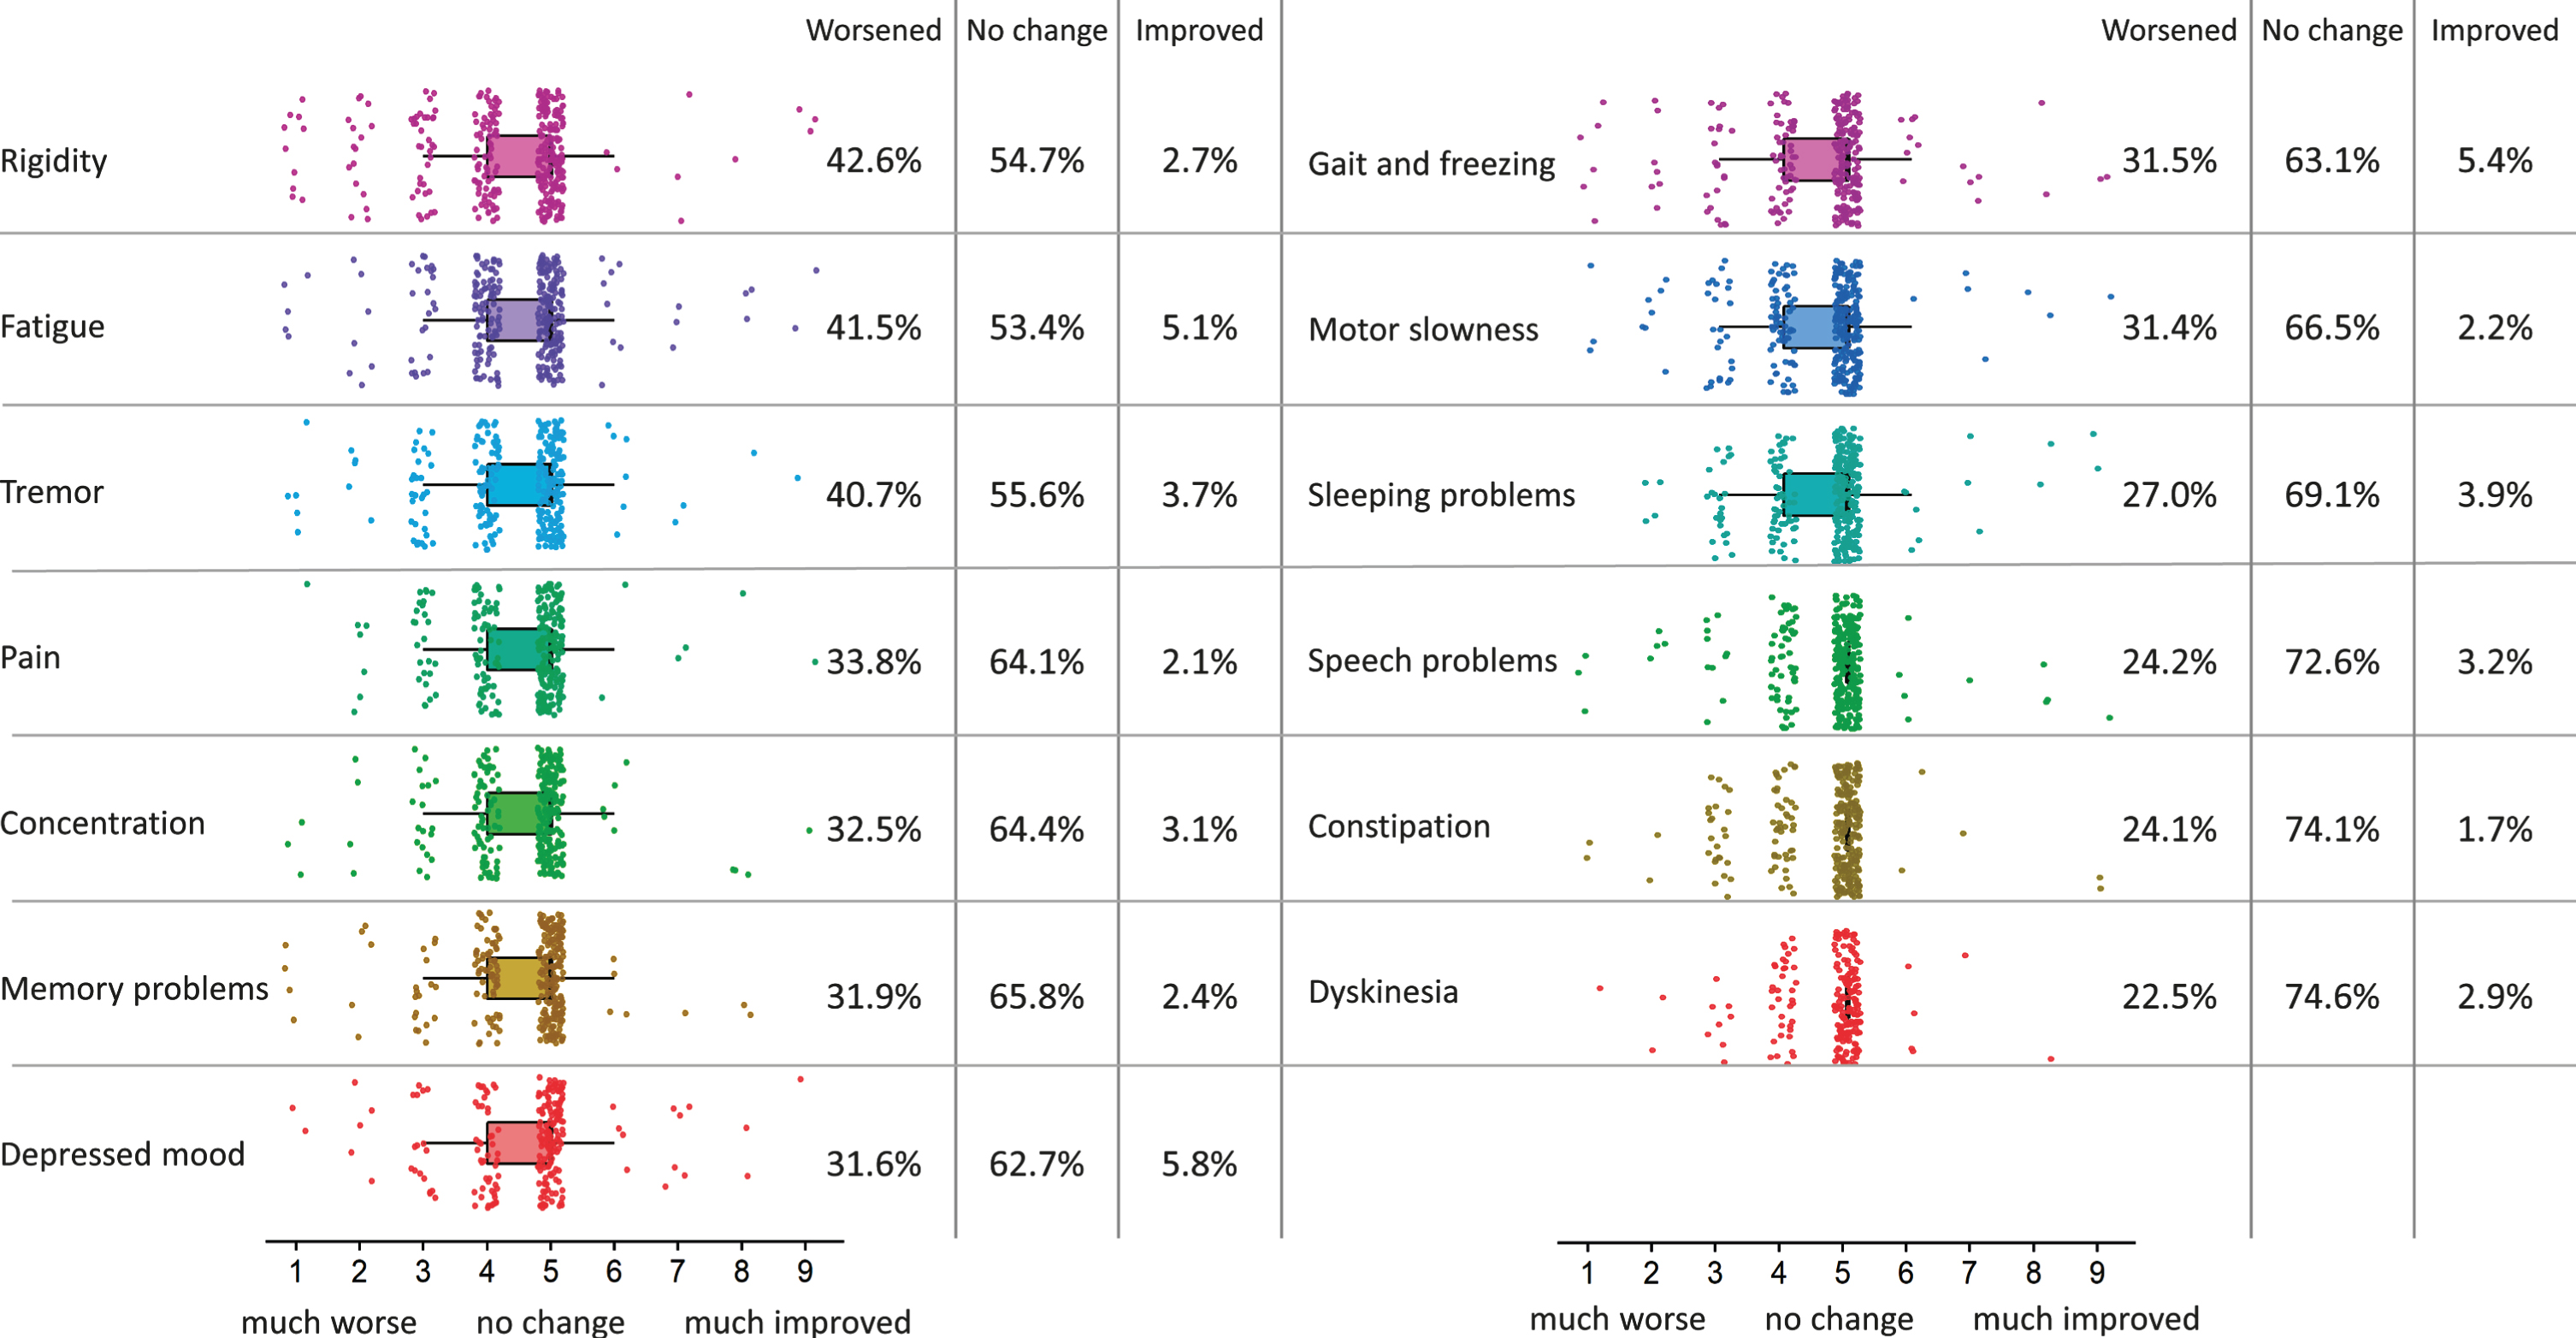 Change in PD symptom severity during COVID-19 pandemic. Changes in PD symptom severity of 13 problems which are common in PD during the COVID-19 pandemic, as compared to a month before the pandemic started (n = 358). The colored boxplots show responses on the 9-point scale (1 = much worse, 5 = no change, 9 = much improved). The percentages at the right side of the boxplots show percentages of people that experienced worsening (scores of 1–4), no change (scores of 5) and improvement (scores of 6–9) for every of these symptoms. Symptoms are ordered by how much they got worse during the COVID-19 pandemic.